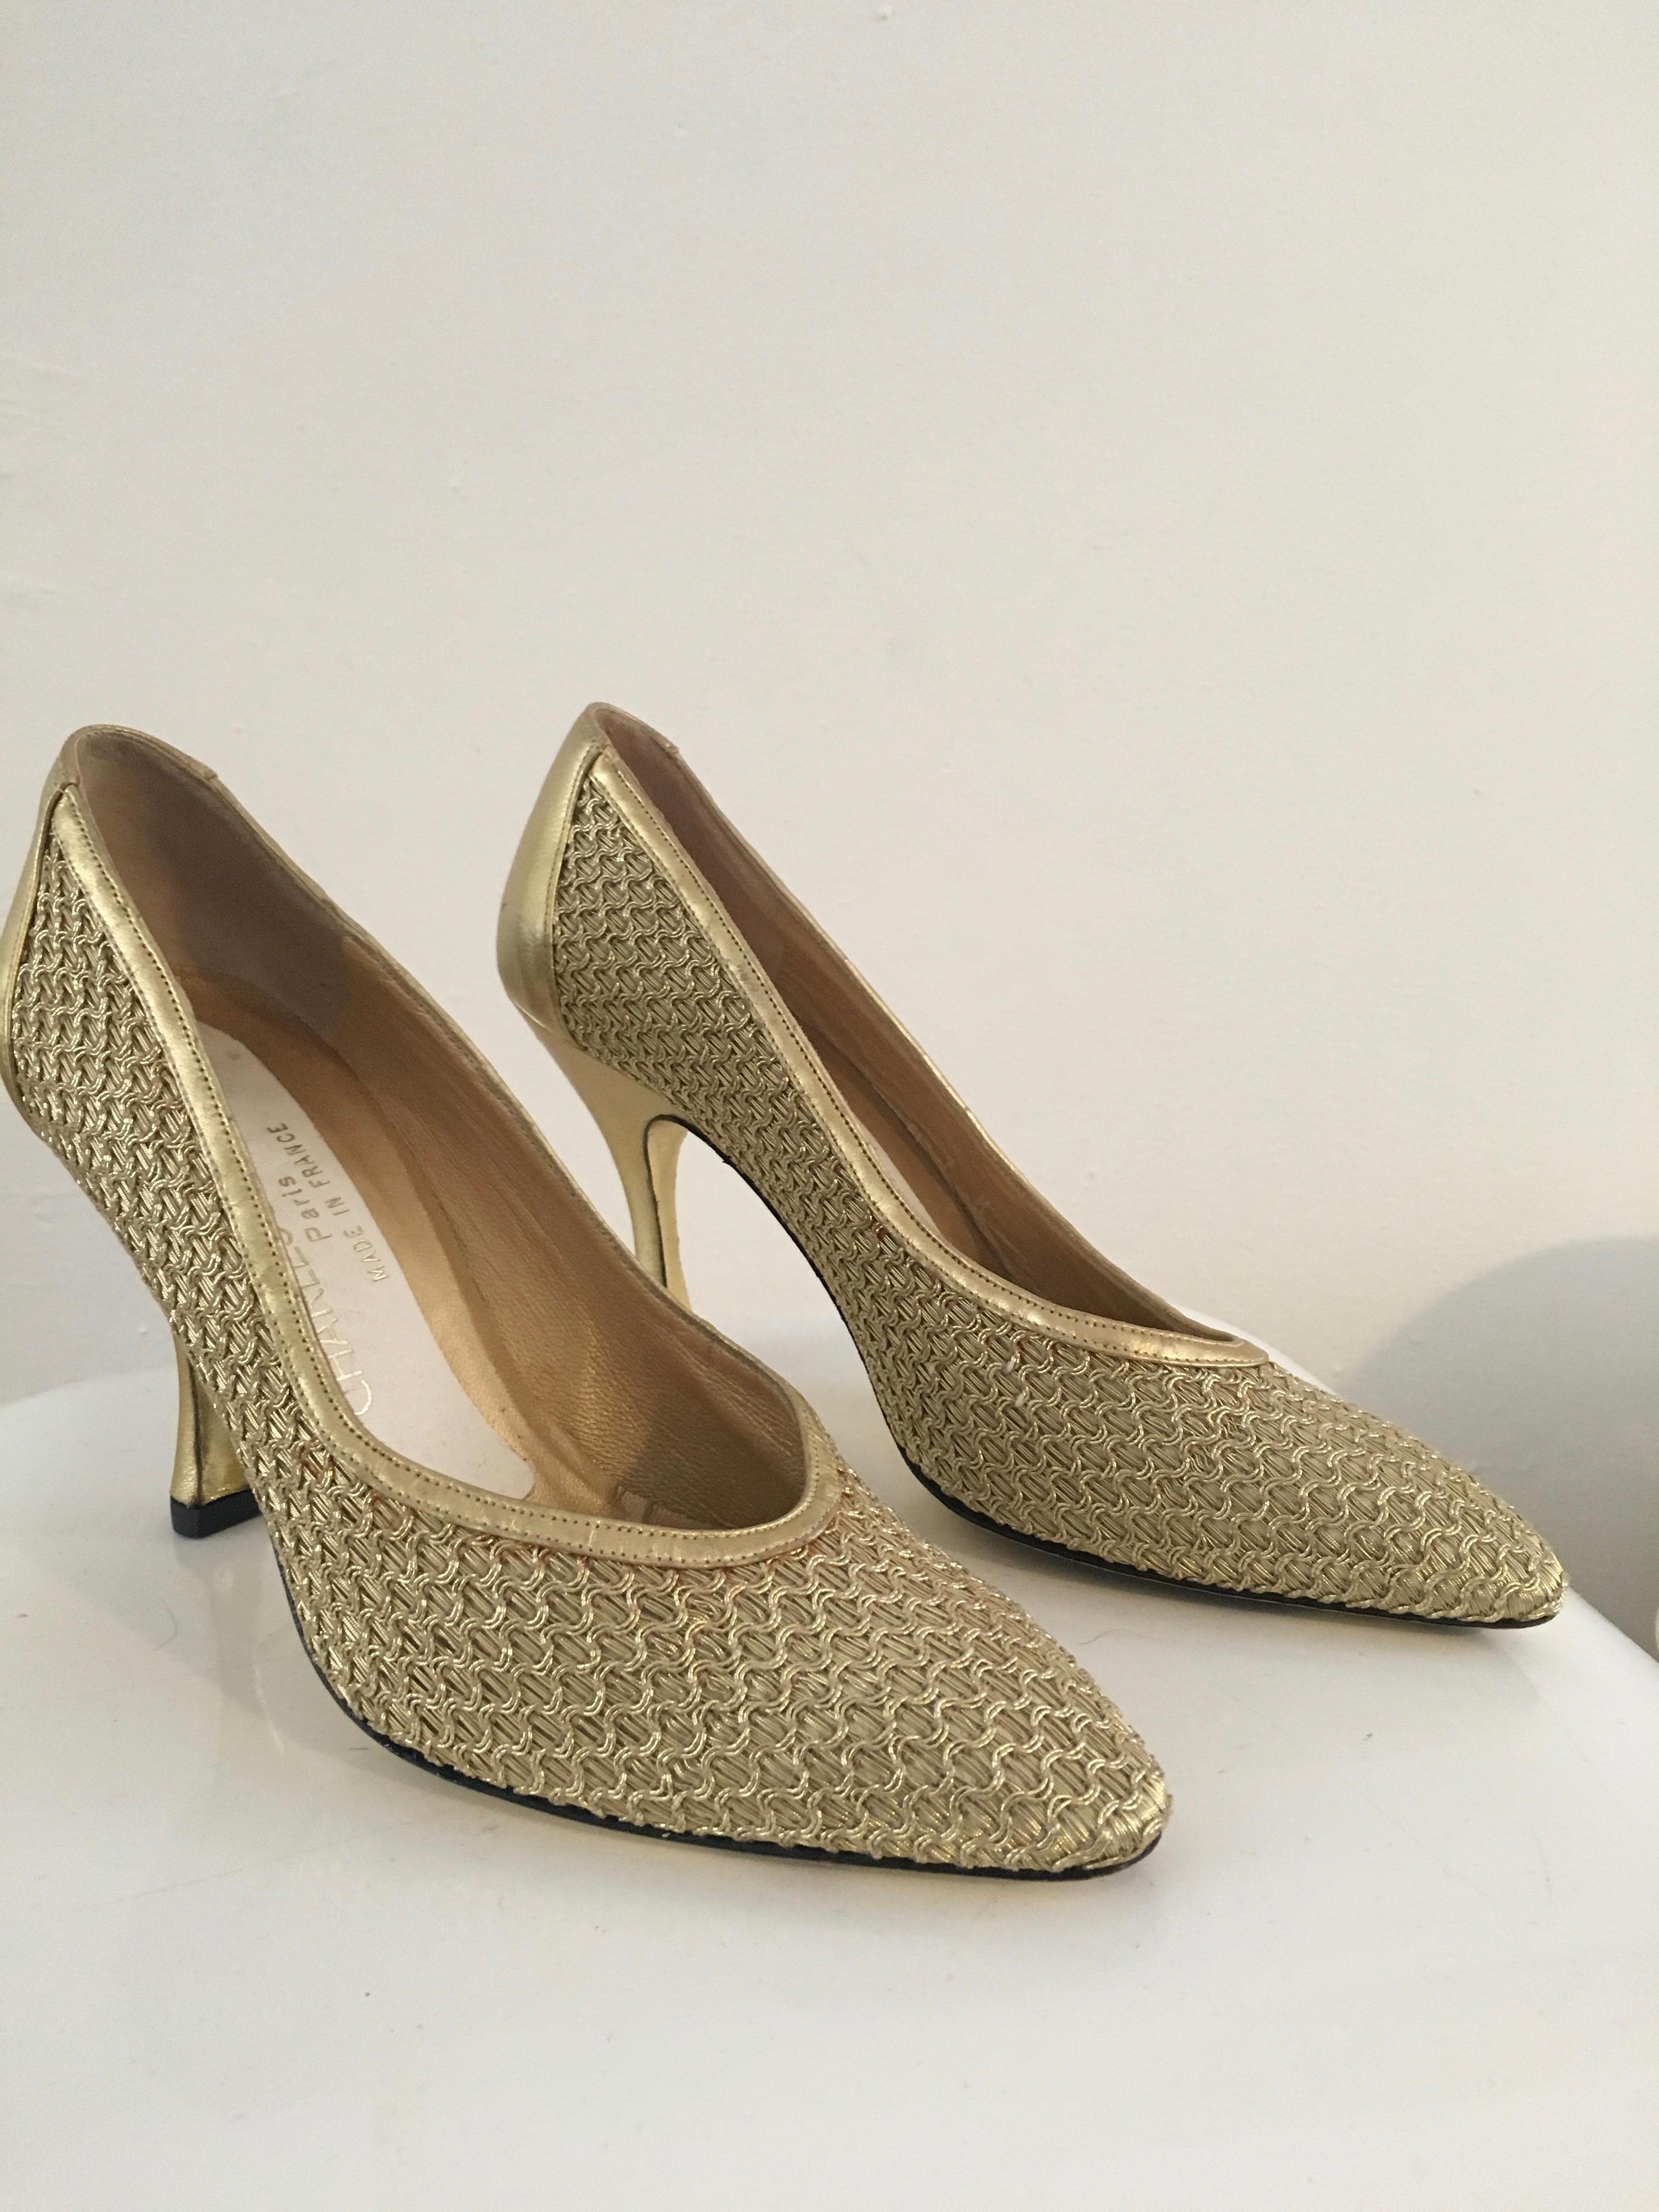 Brown Charles Jourdan 1980s Gold Pumps Size 7M. For Sale